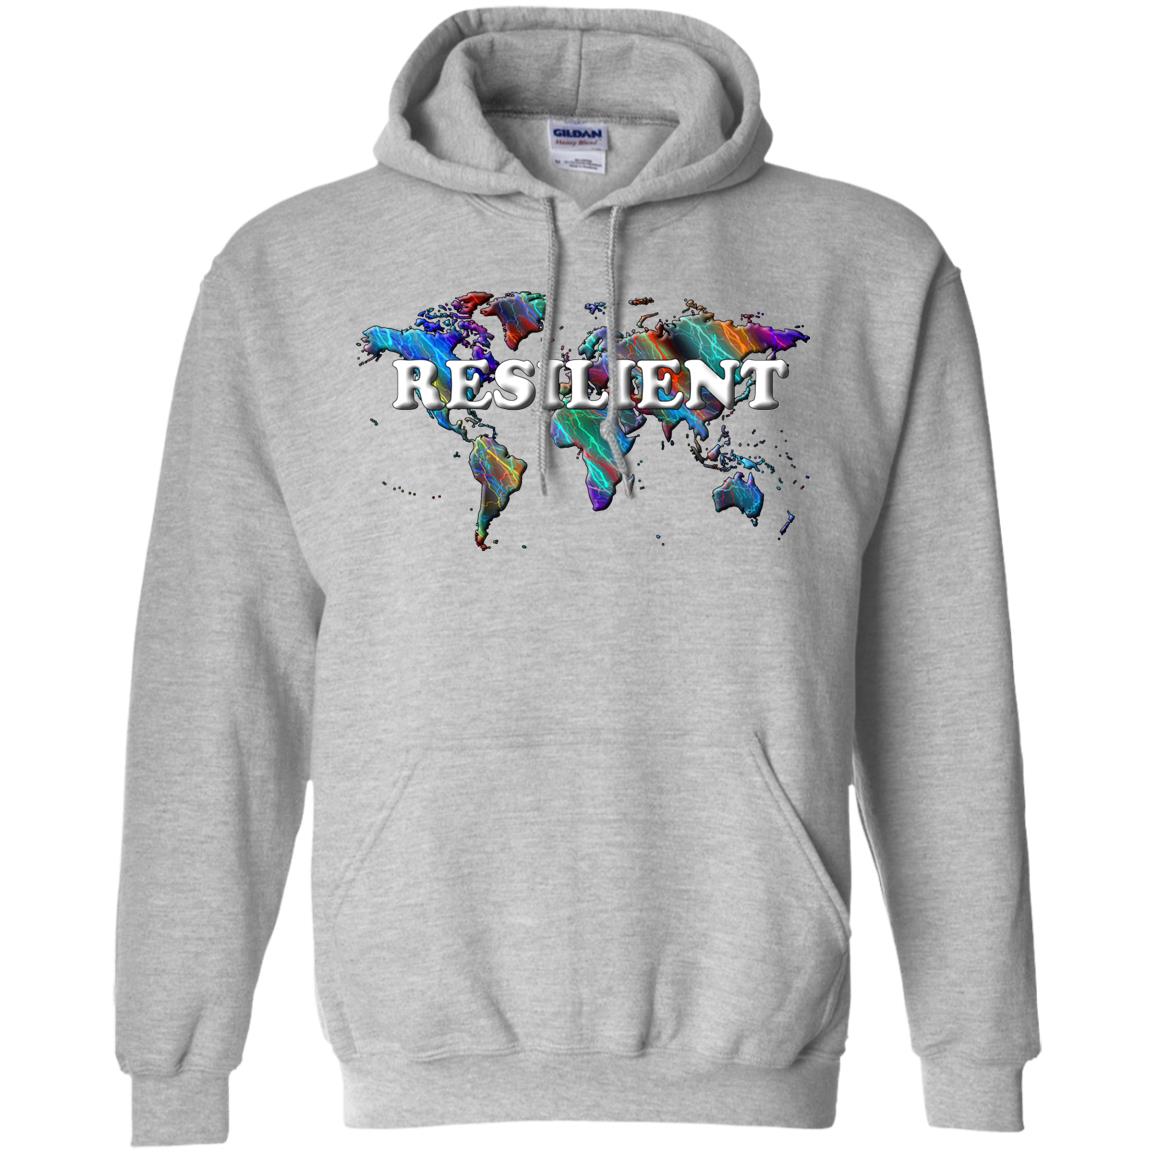 Resilient Statement Hoodie